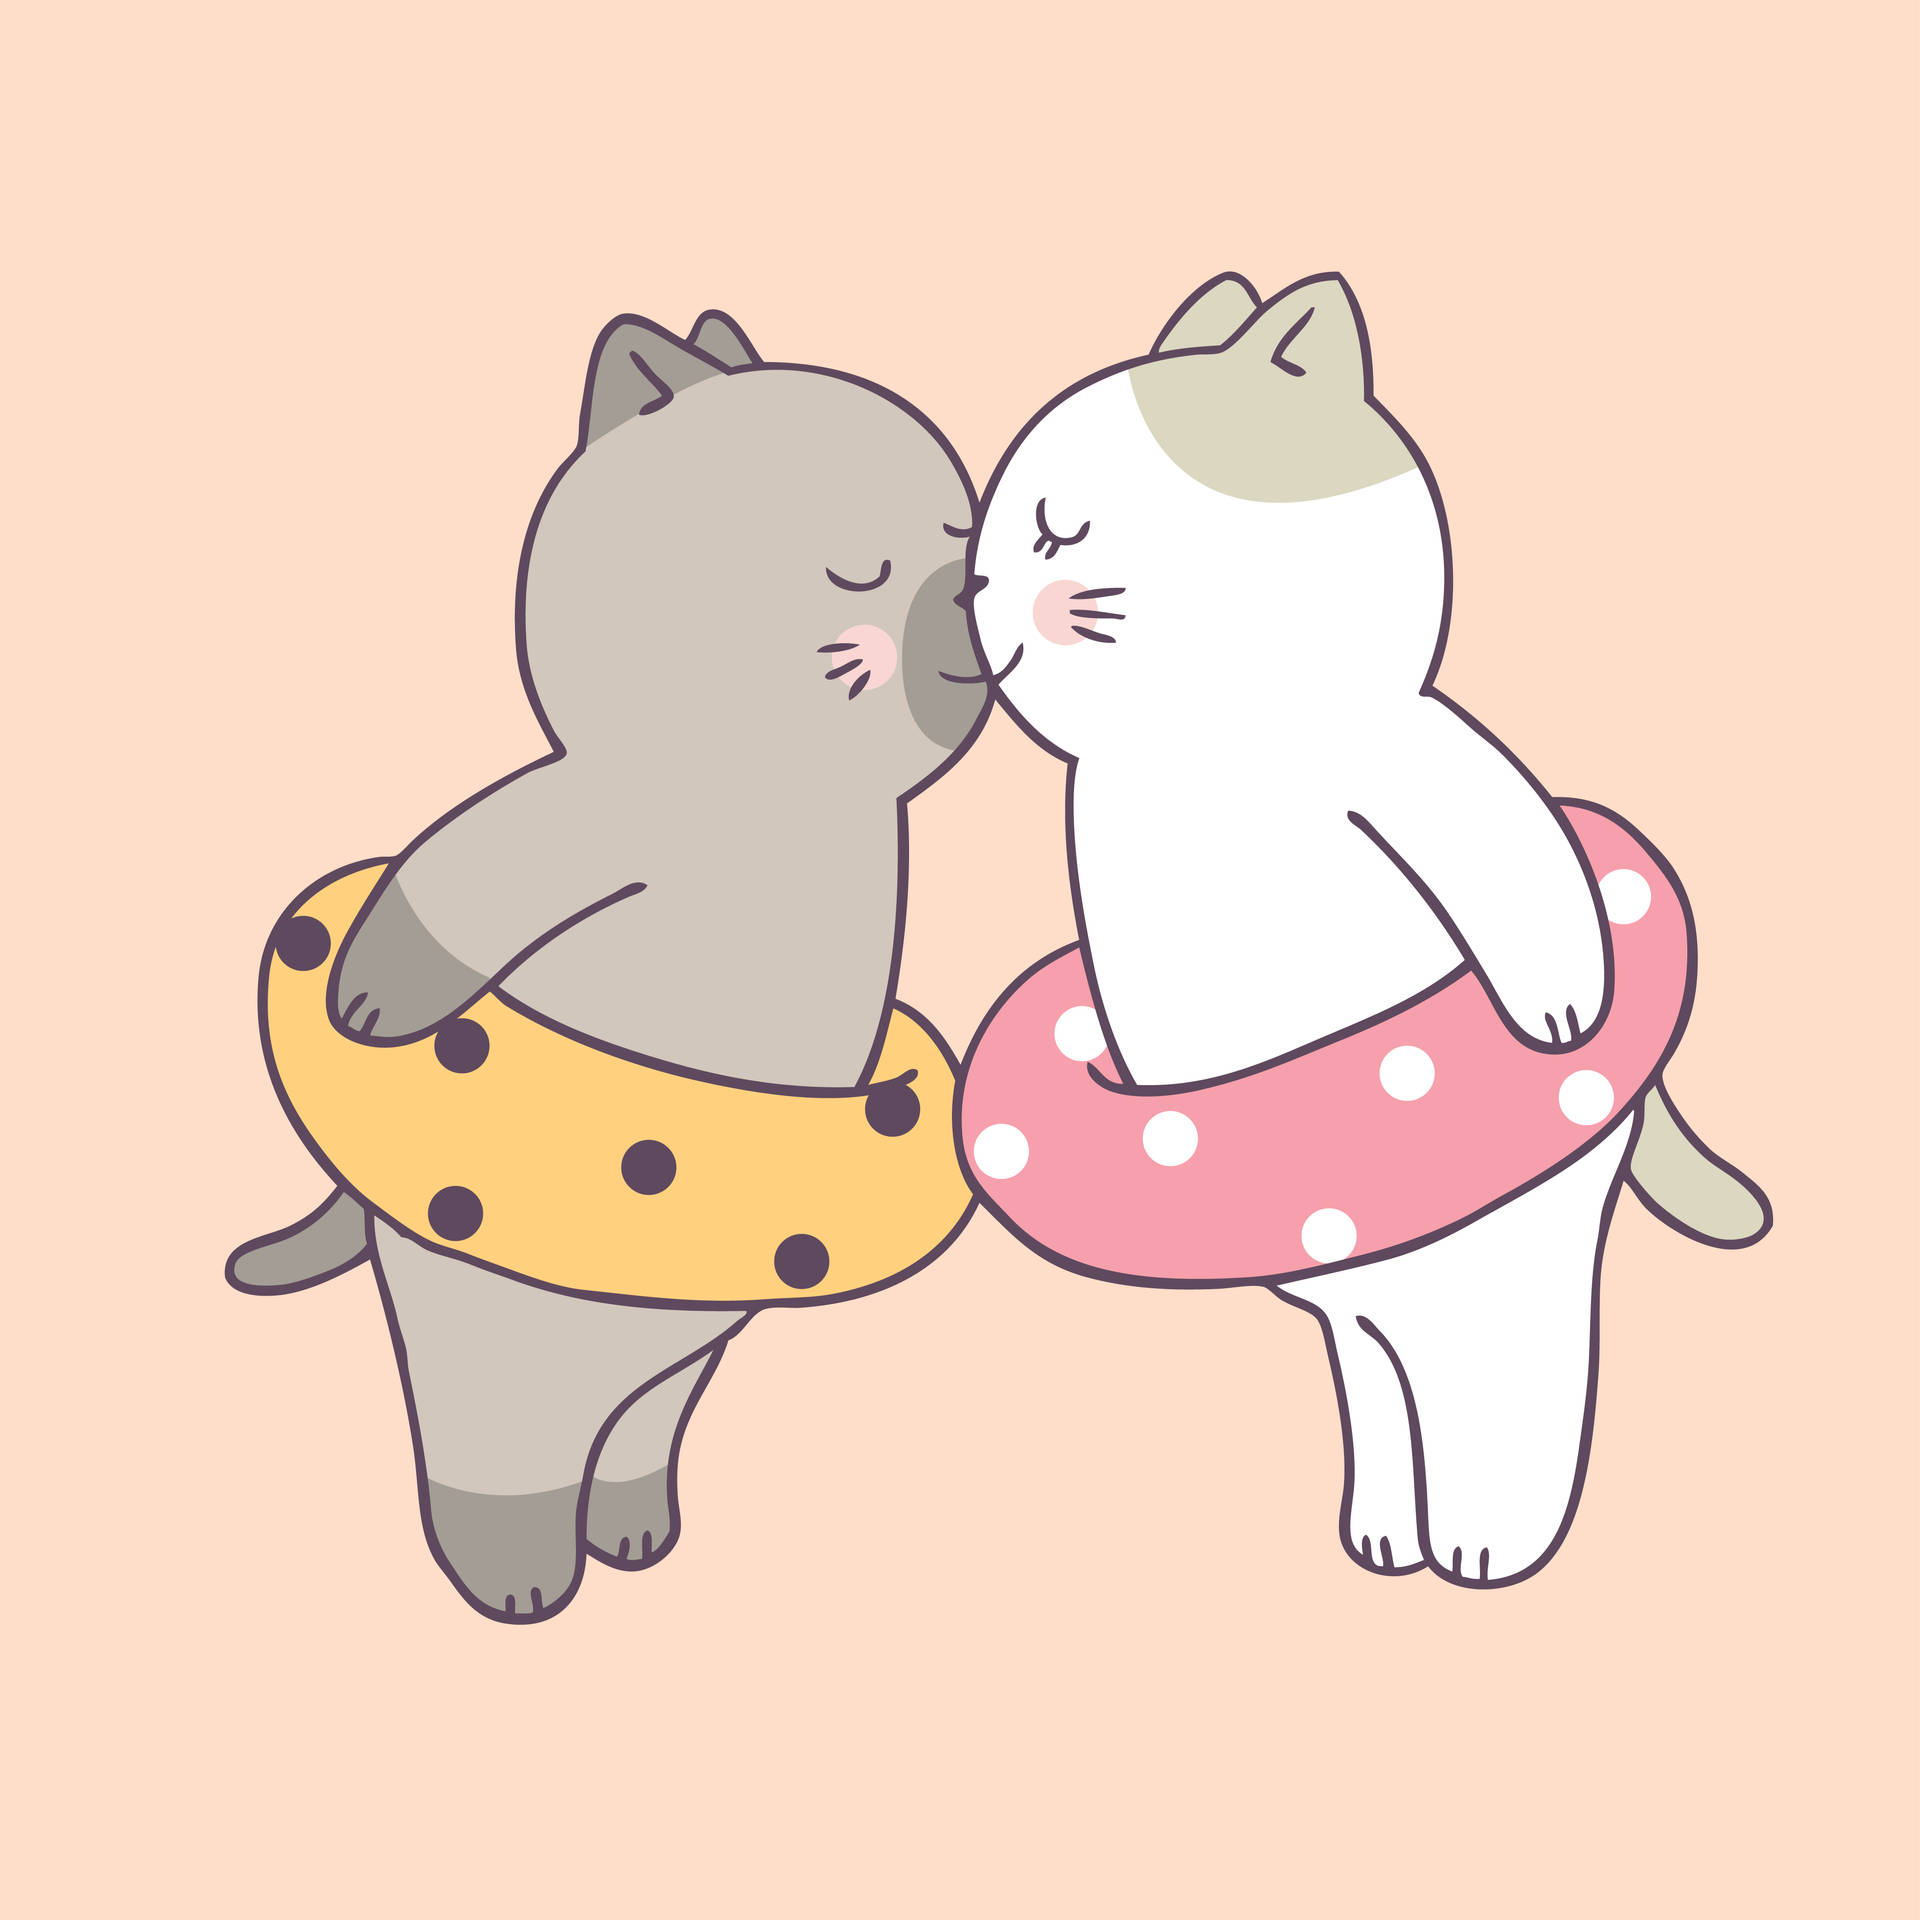 Couple Cat Background Wallpaper Image For Free Download - Pngtree